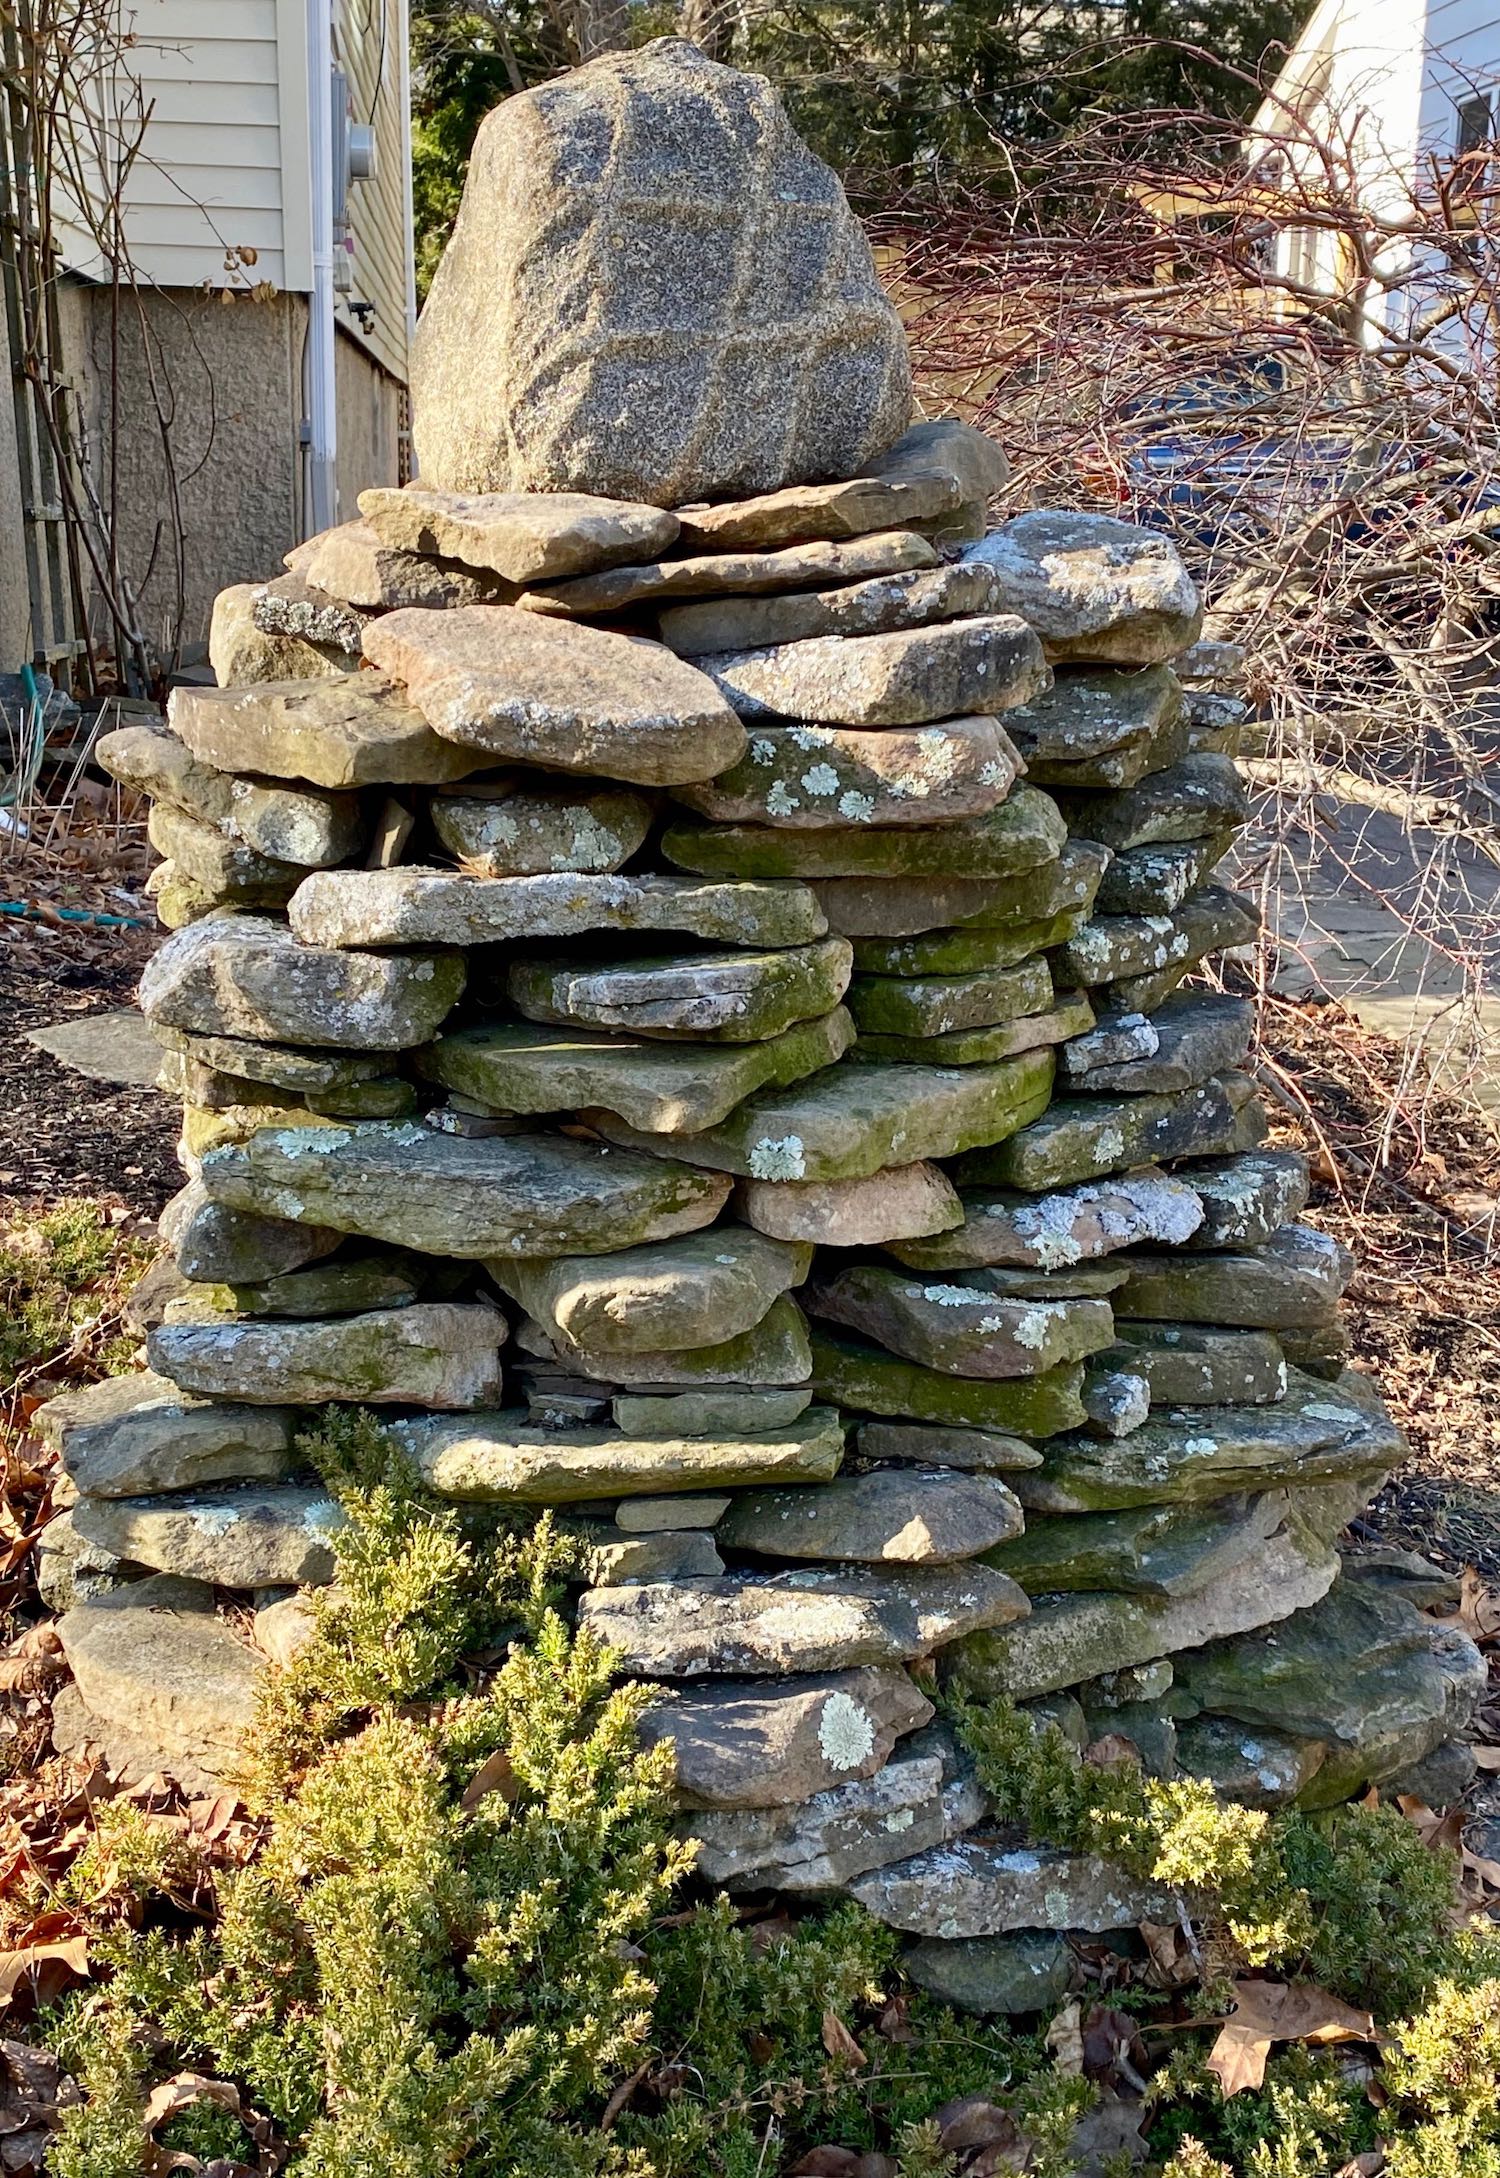 It's the weekend! Number 241, Rock Stack in an Arlington, MA Front Yard